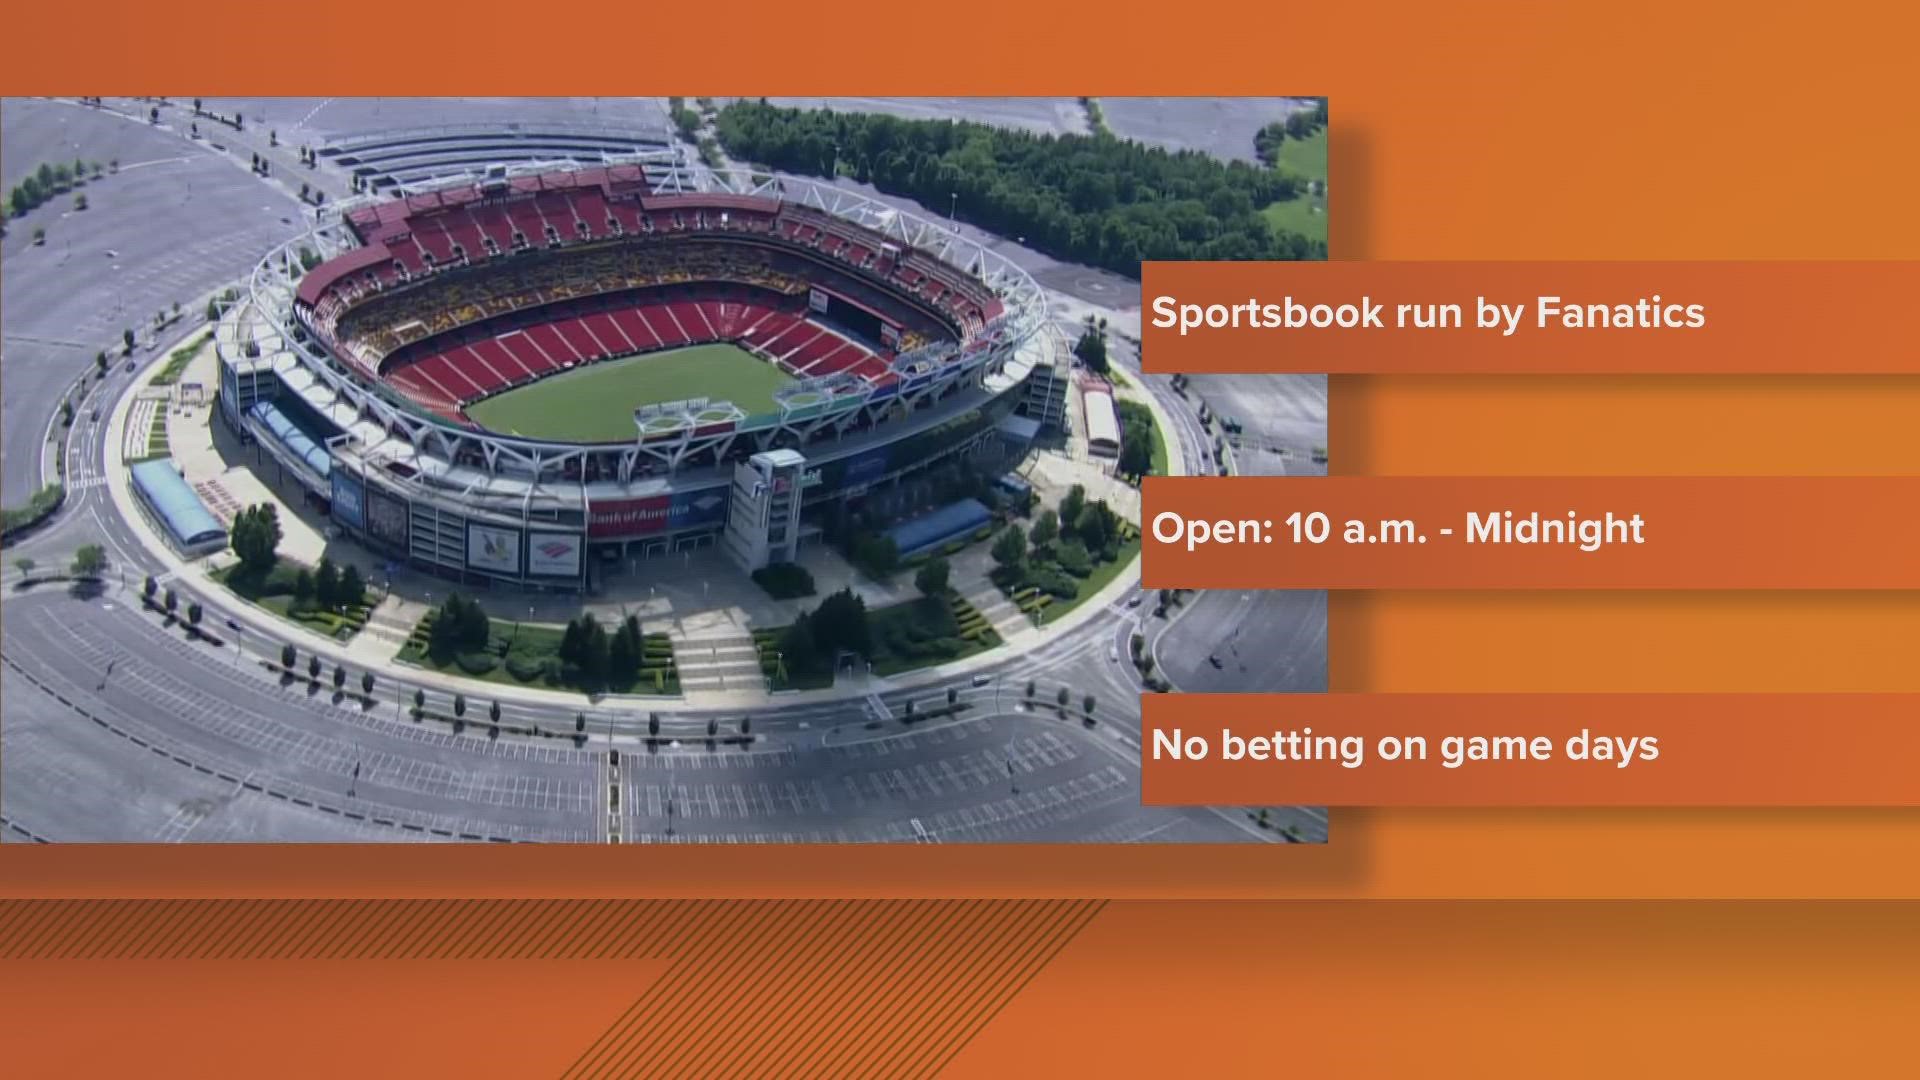 It's the first sports betting lounge inside an NFL stadium.